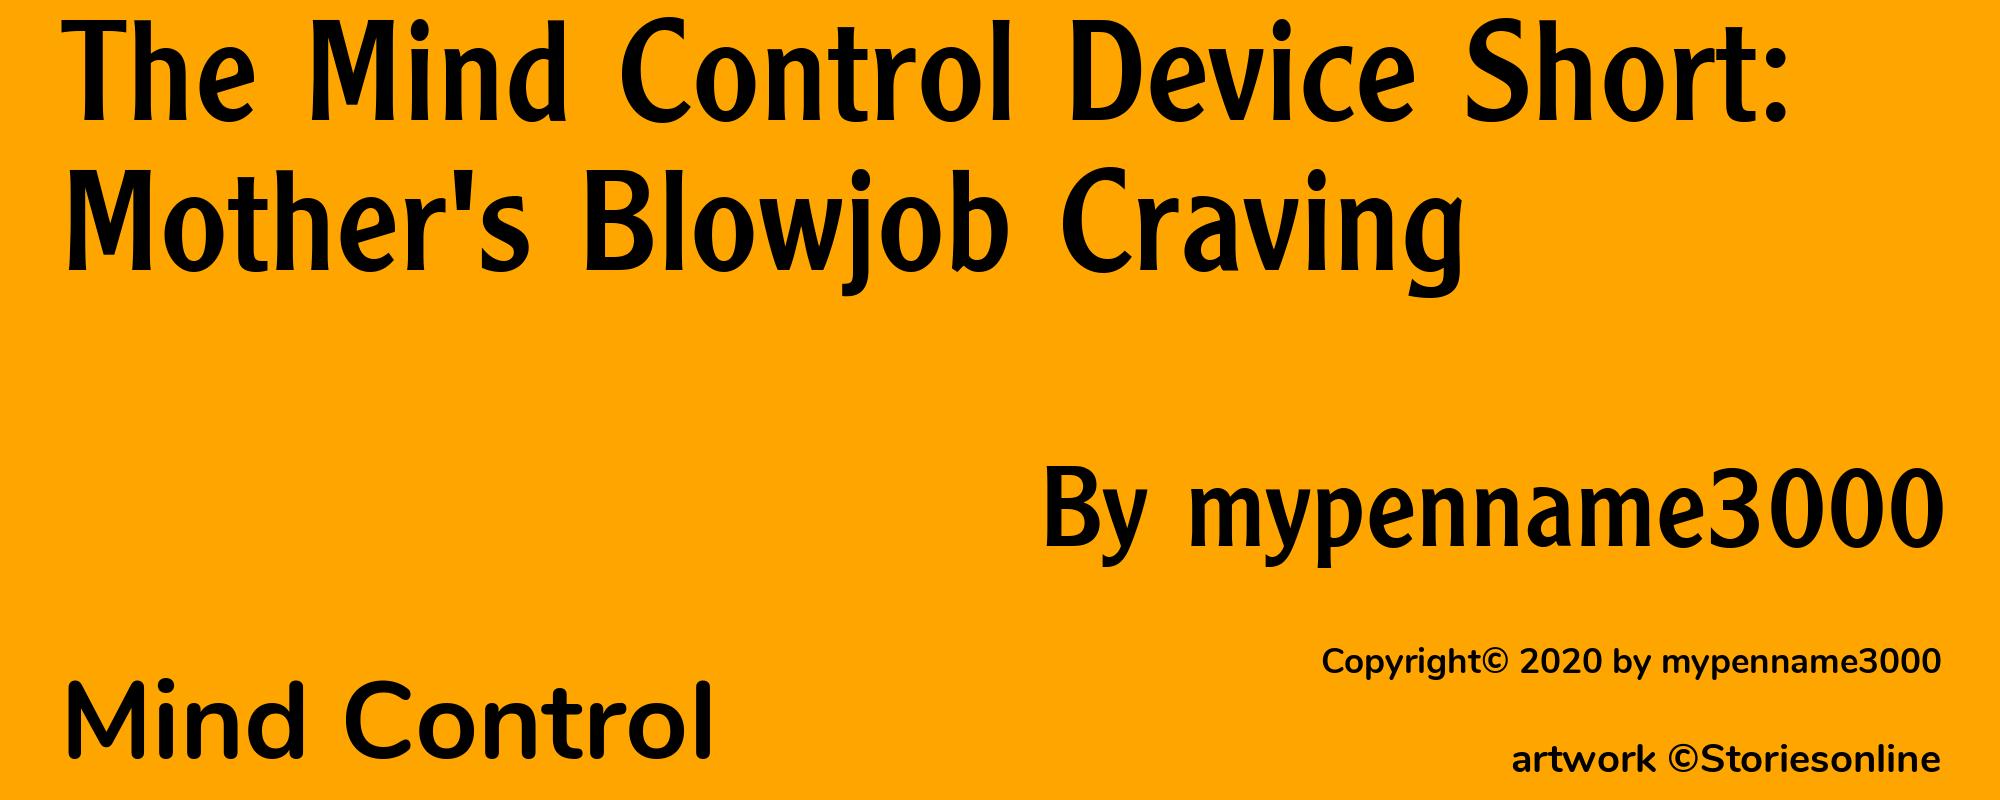 The Mind Control Device Short: Mother's Blowjob Craving - Cover